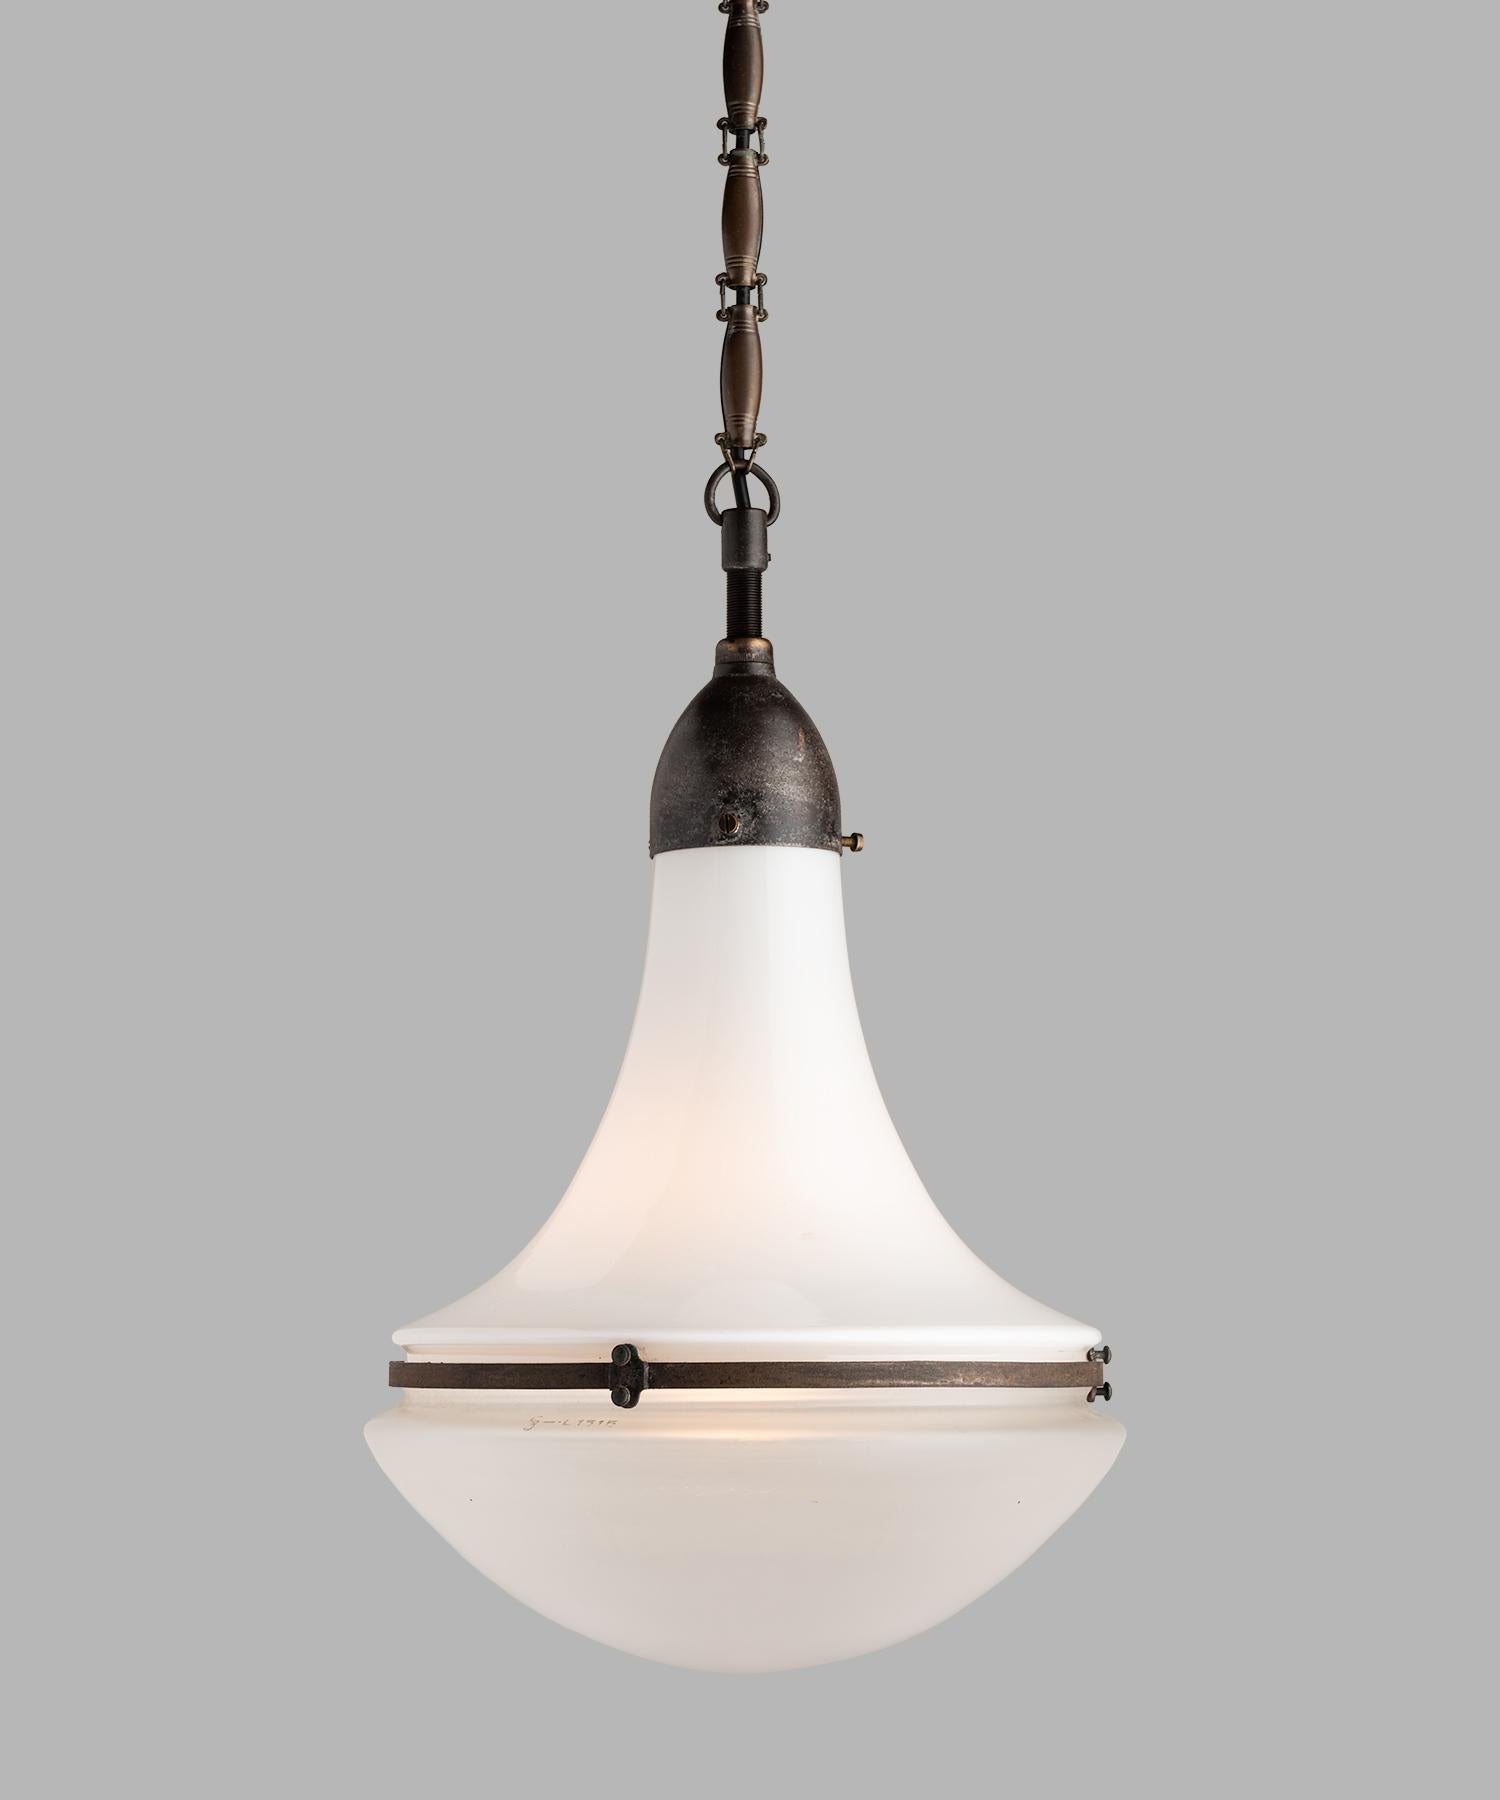 Peter Behrens Luzette pendant, Germany, circa 1920.

Large pendant with opaline glass top and frosted glass bottom, secured with copper fitter and brace. Manufactured by AEG Siemens with manufacturer's mark.